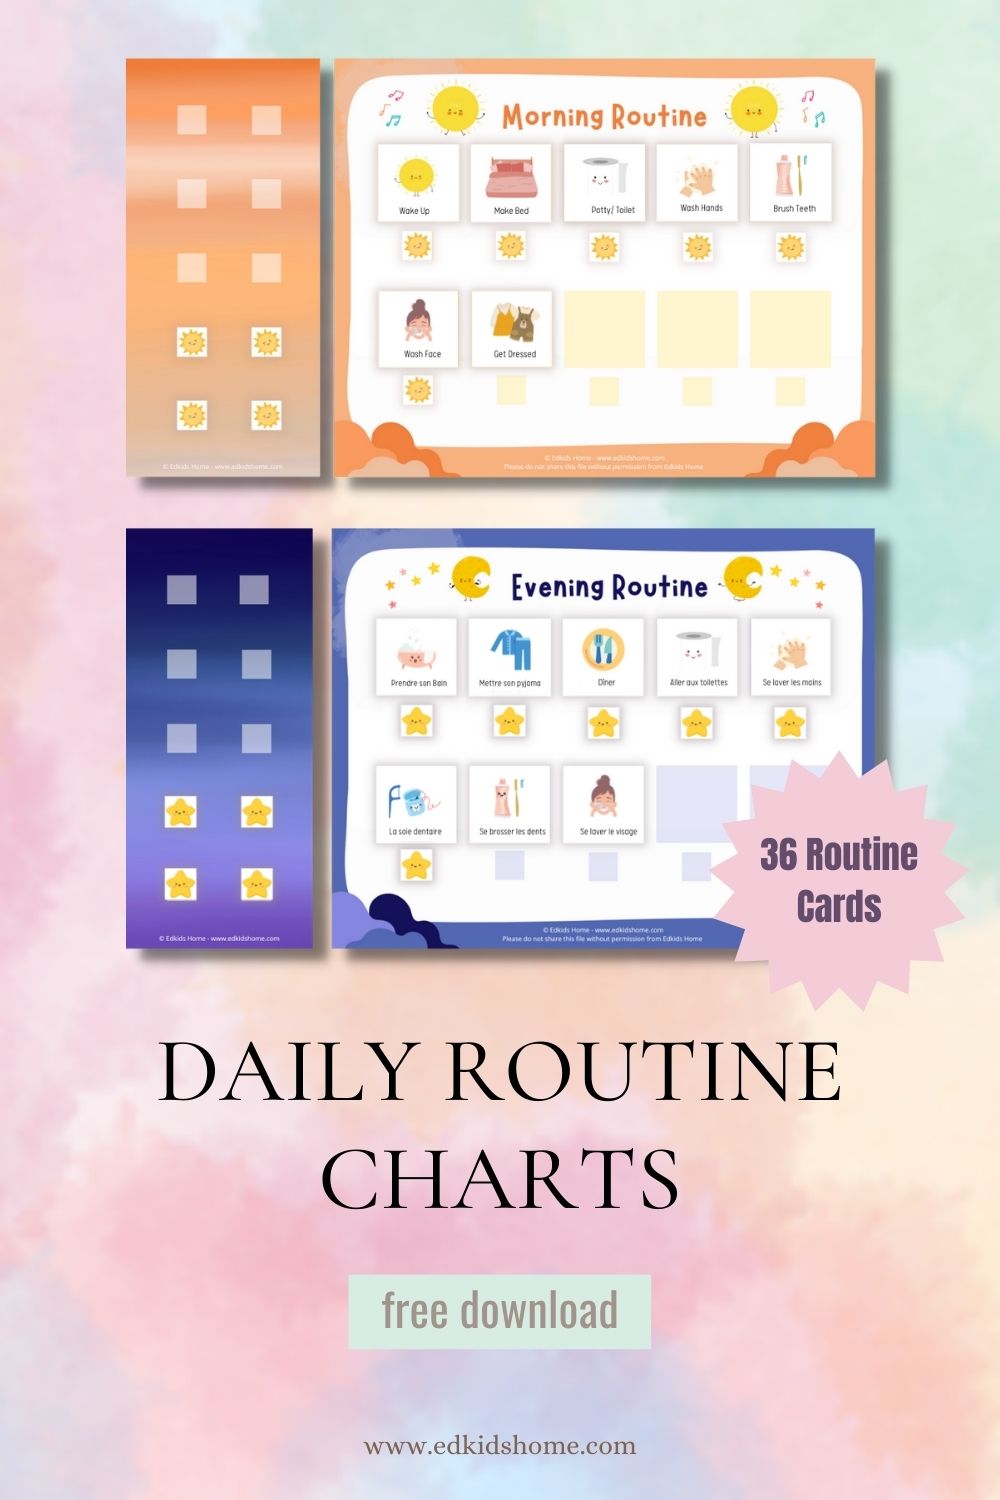 Free printable: Daily routine charts with 36 routine cards